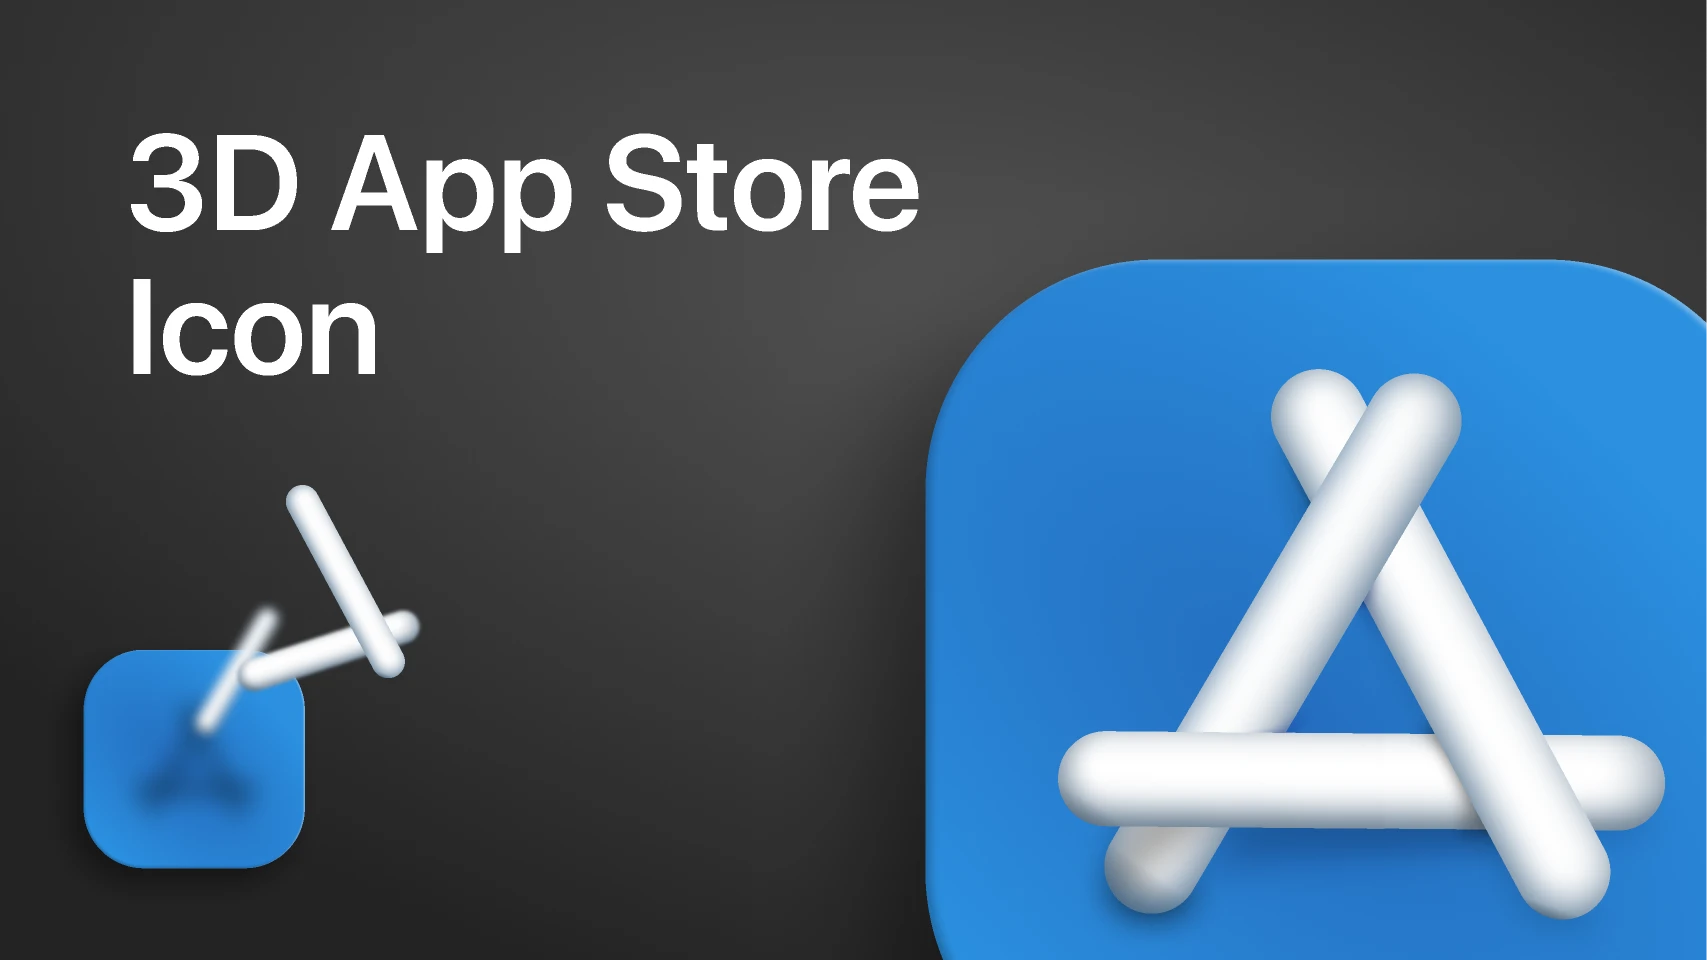 3D App Store Icon for Figma and Adobe XD